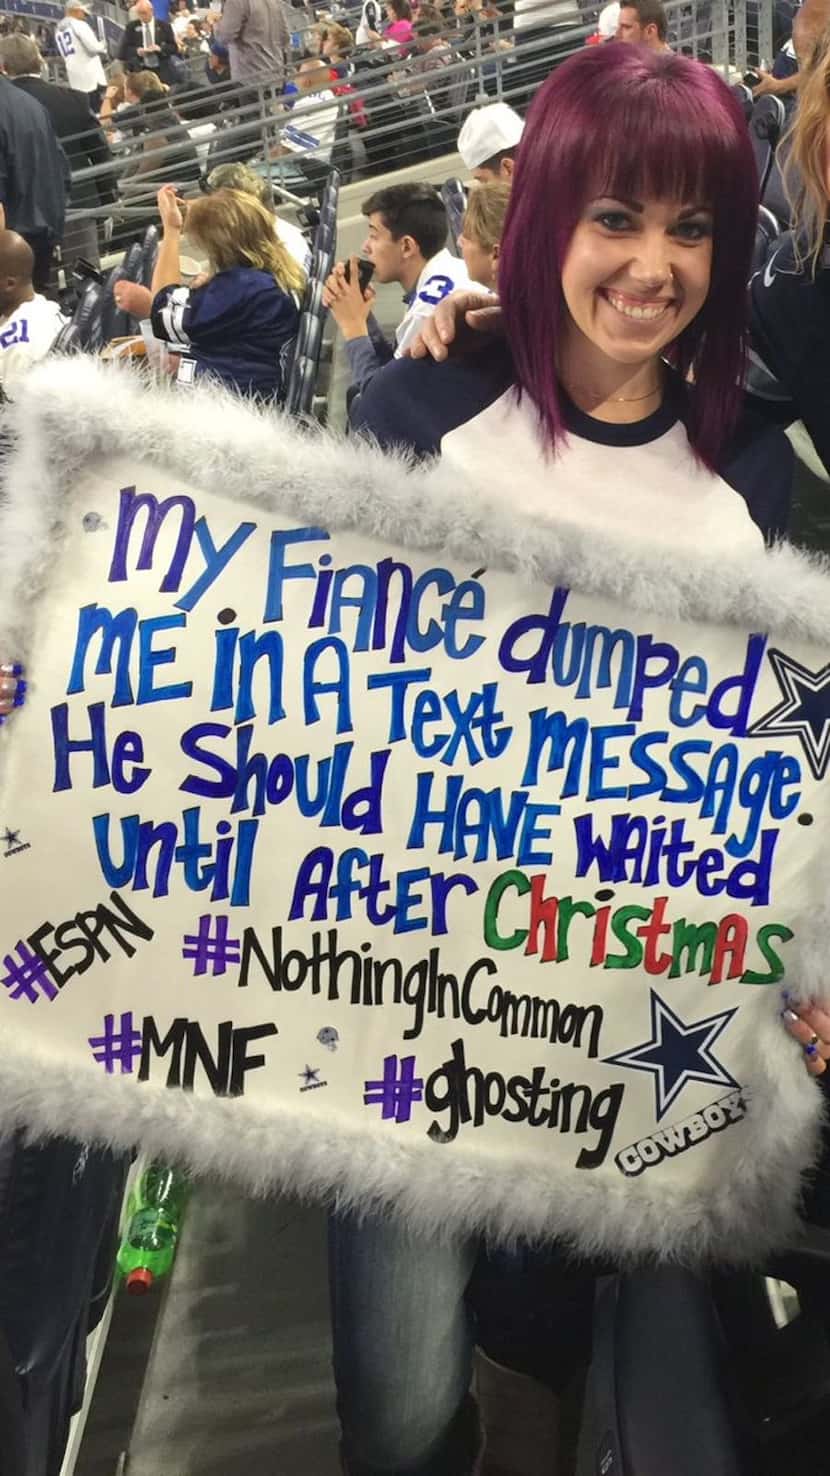 Brenna Clanton and her sign at the Dallas Cowboys game.